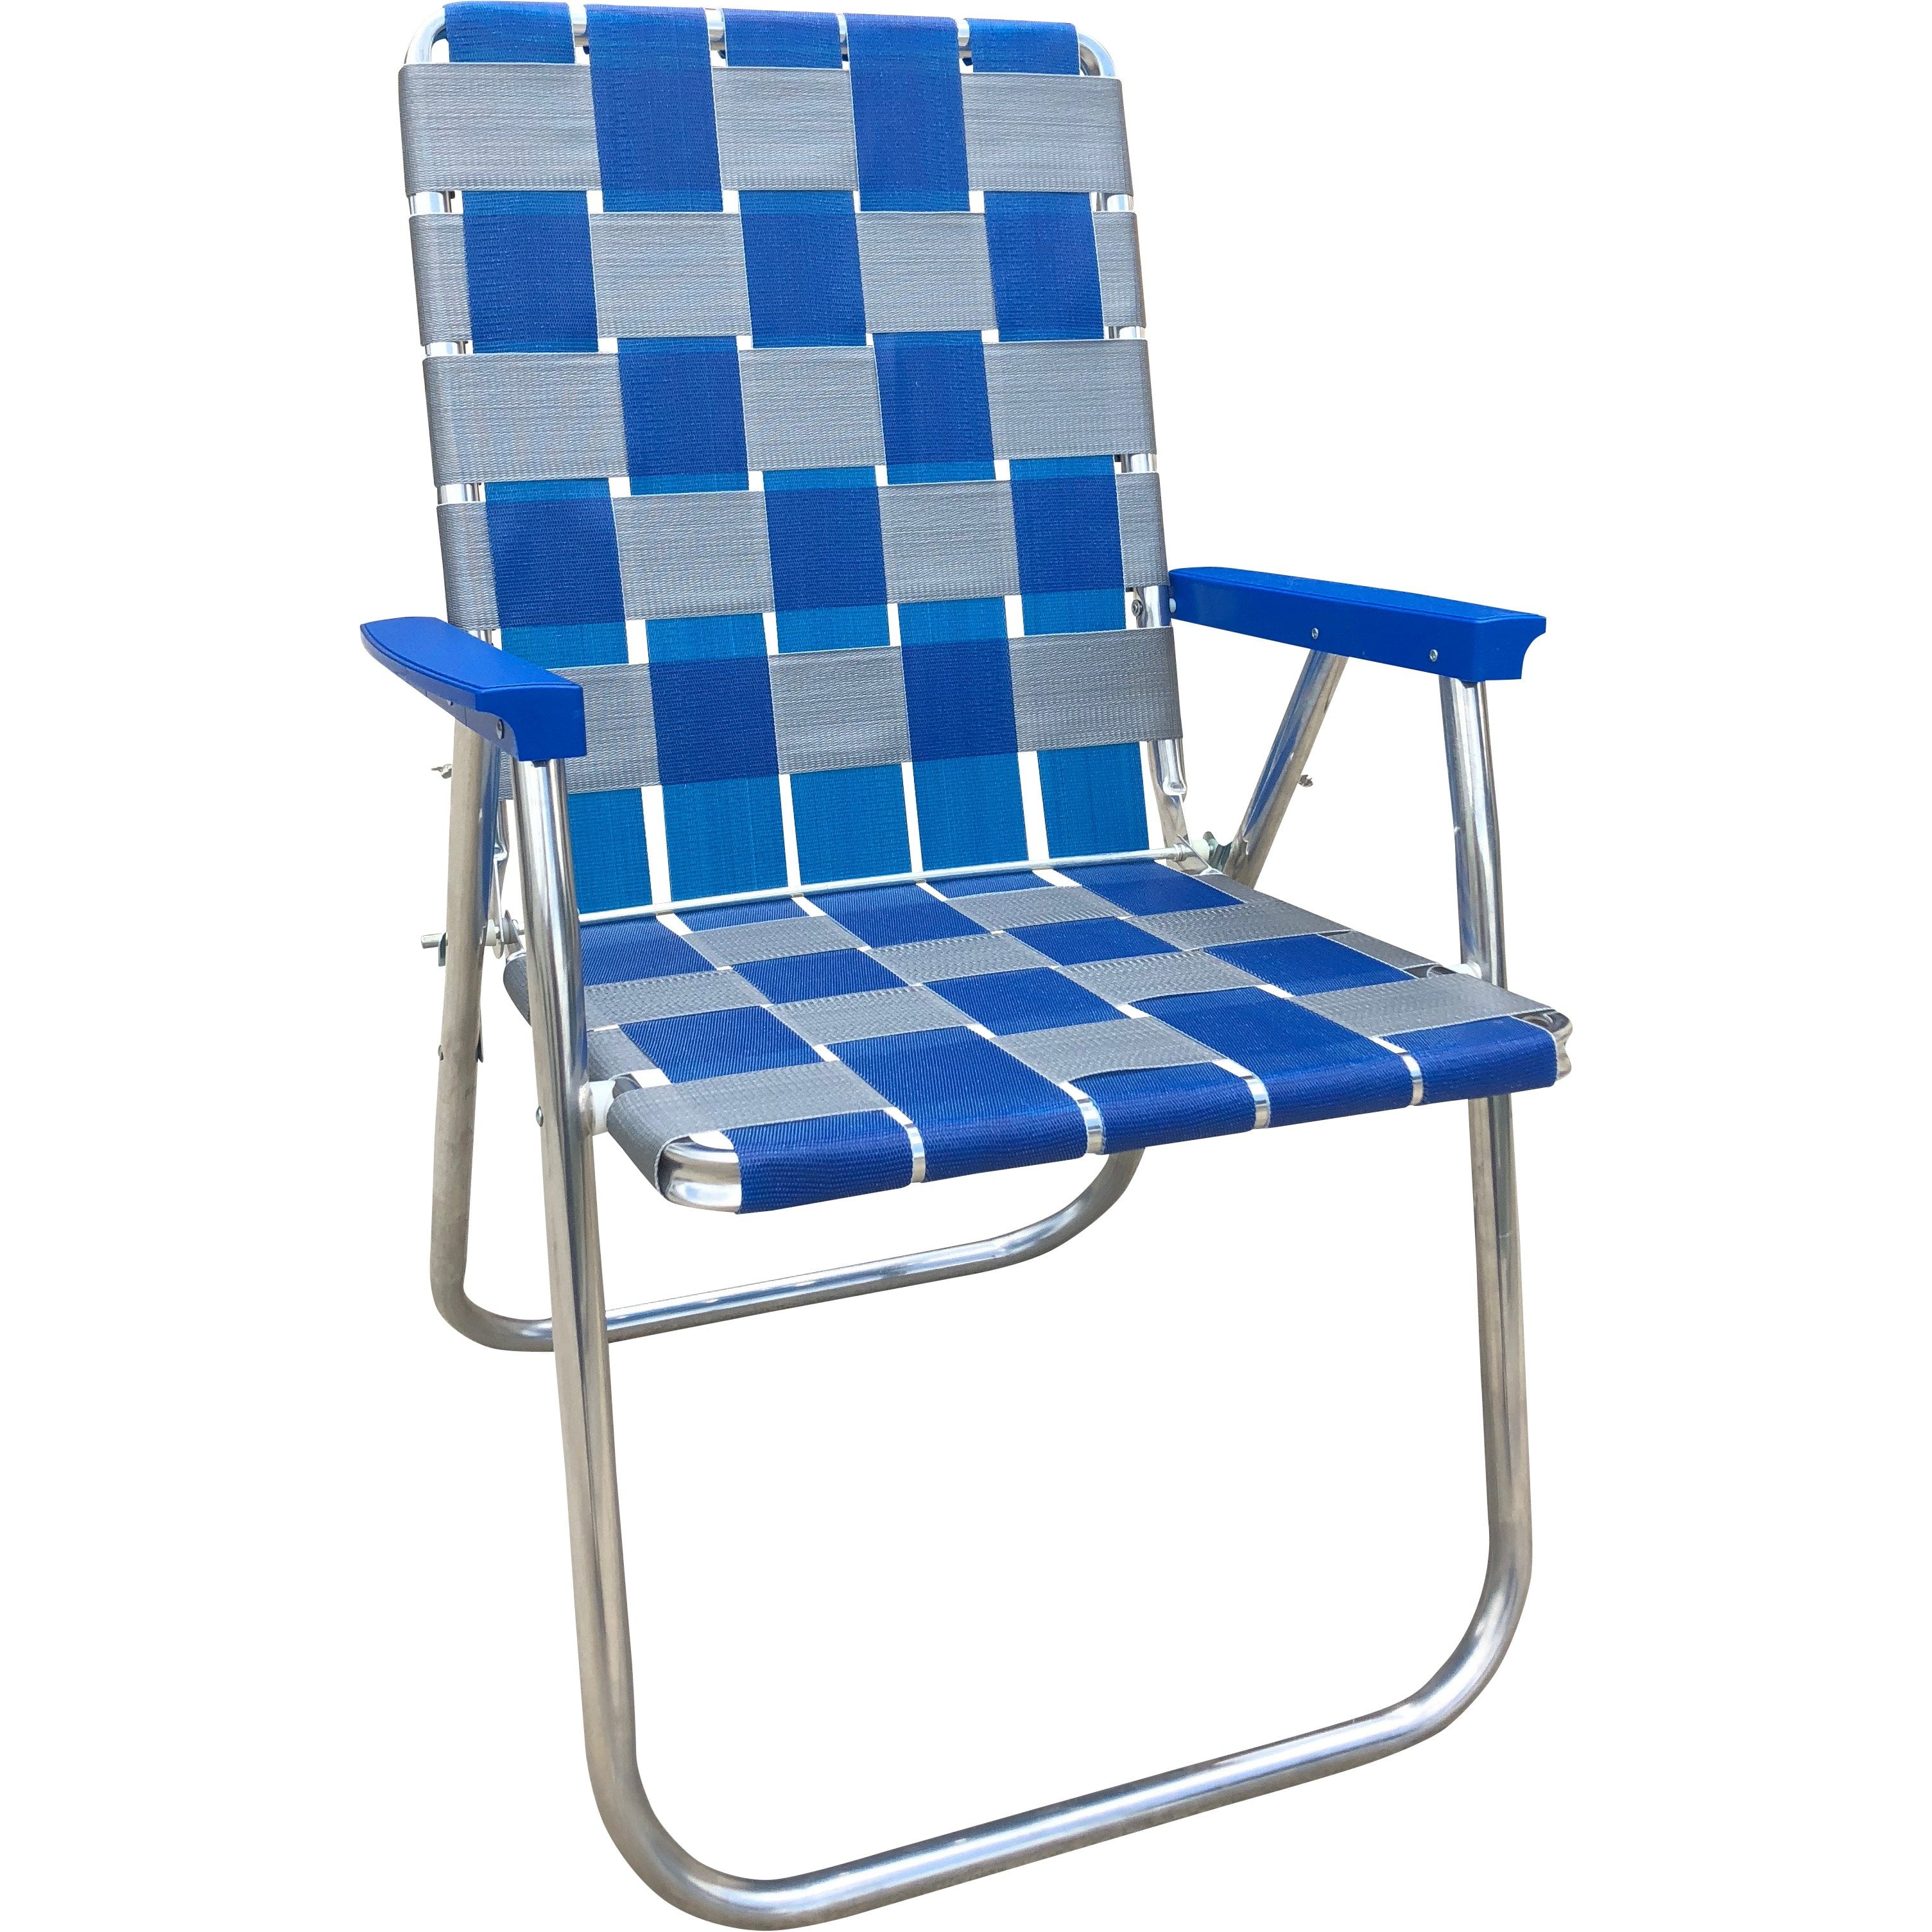 webbed lawn chairs